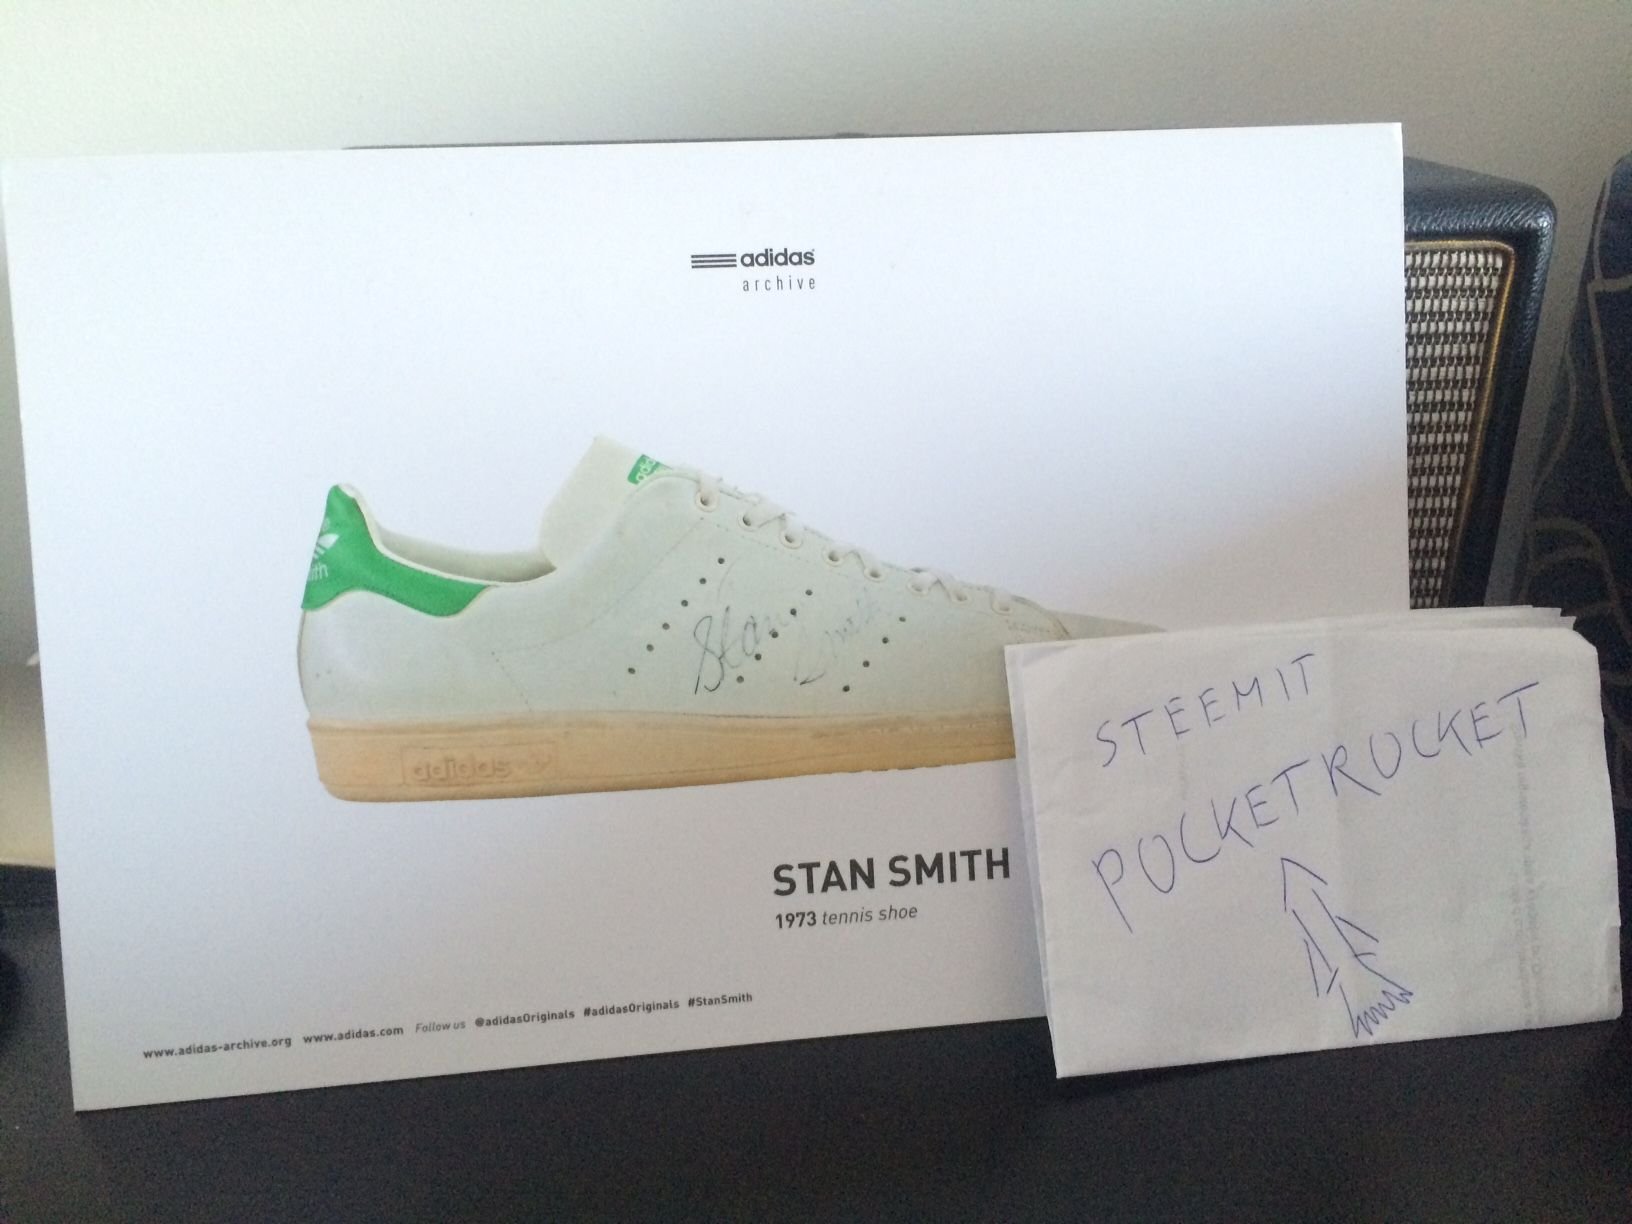 Reduction - stan smith 1973 - OFF 70% - Free delivery - www.ostellionline.it